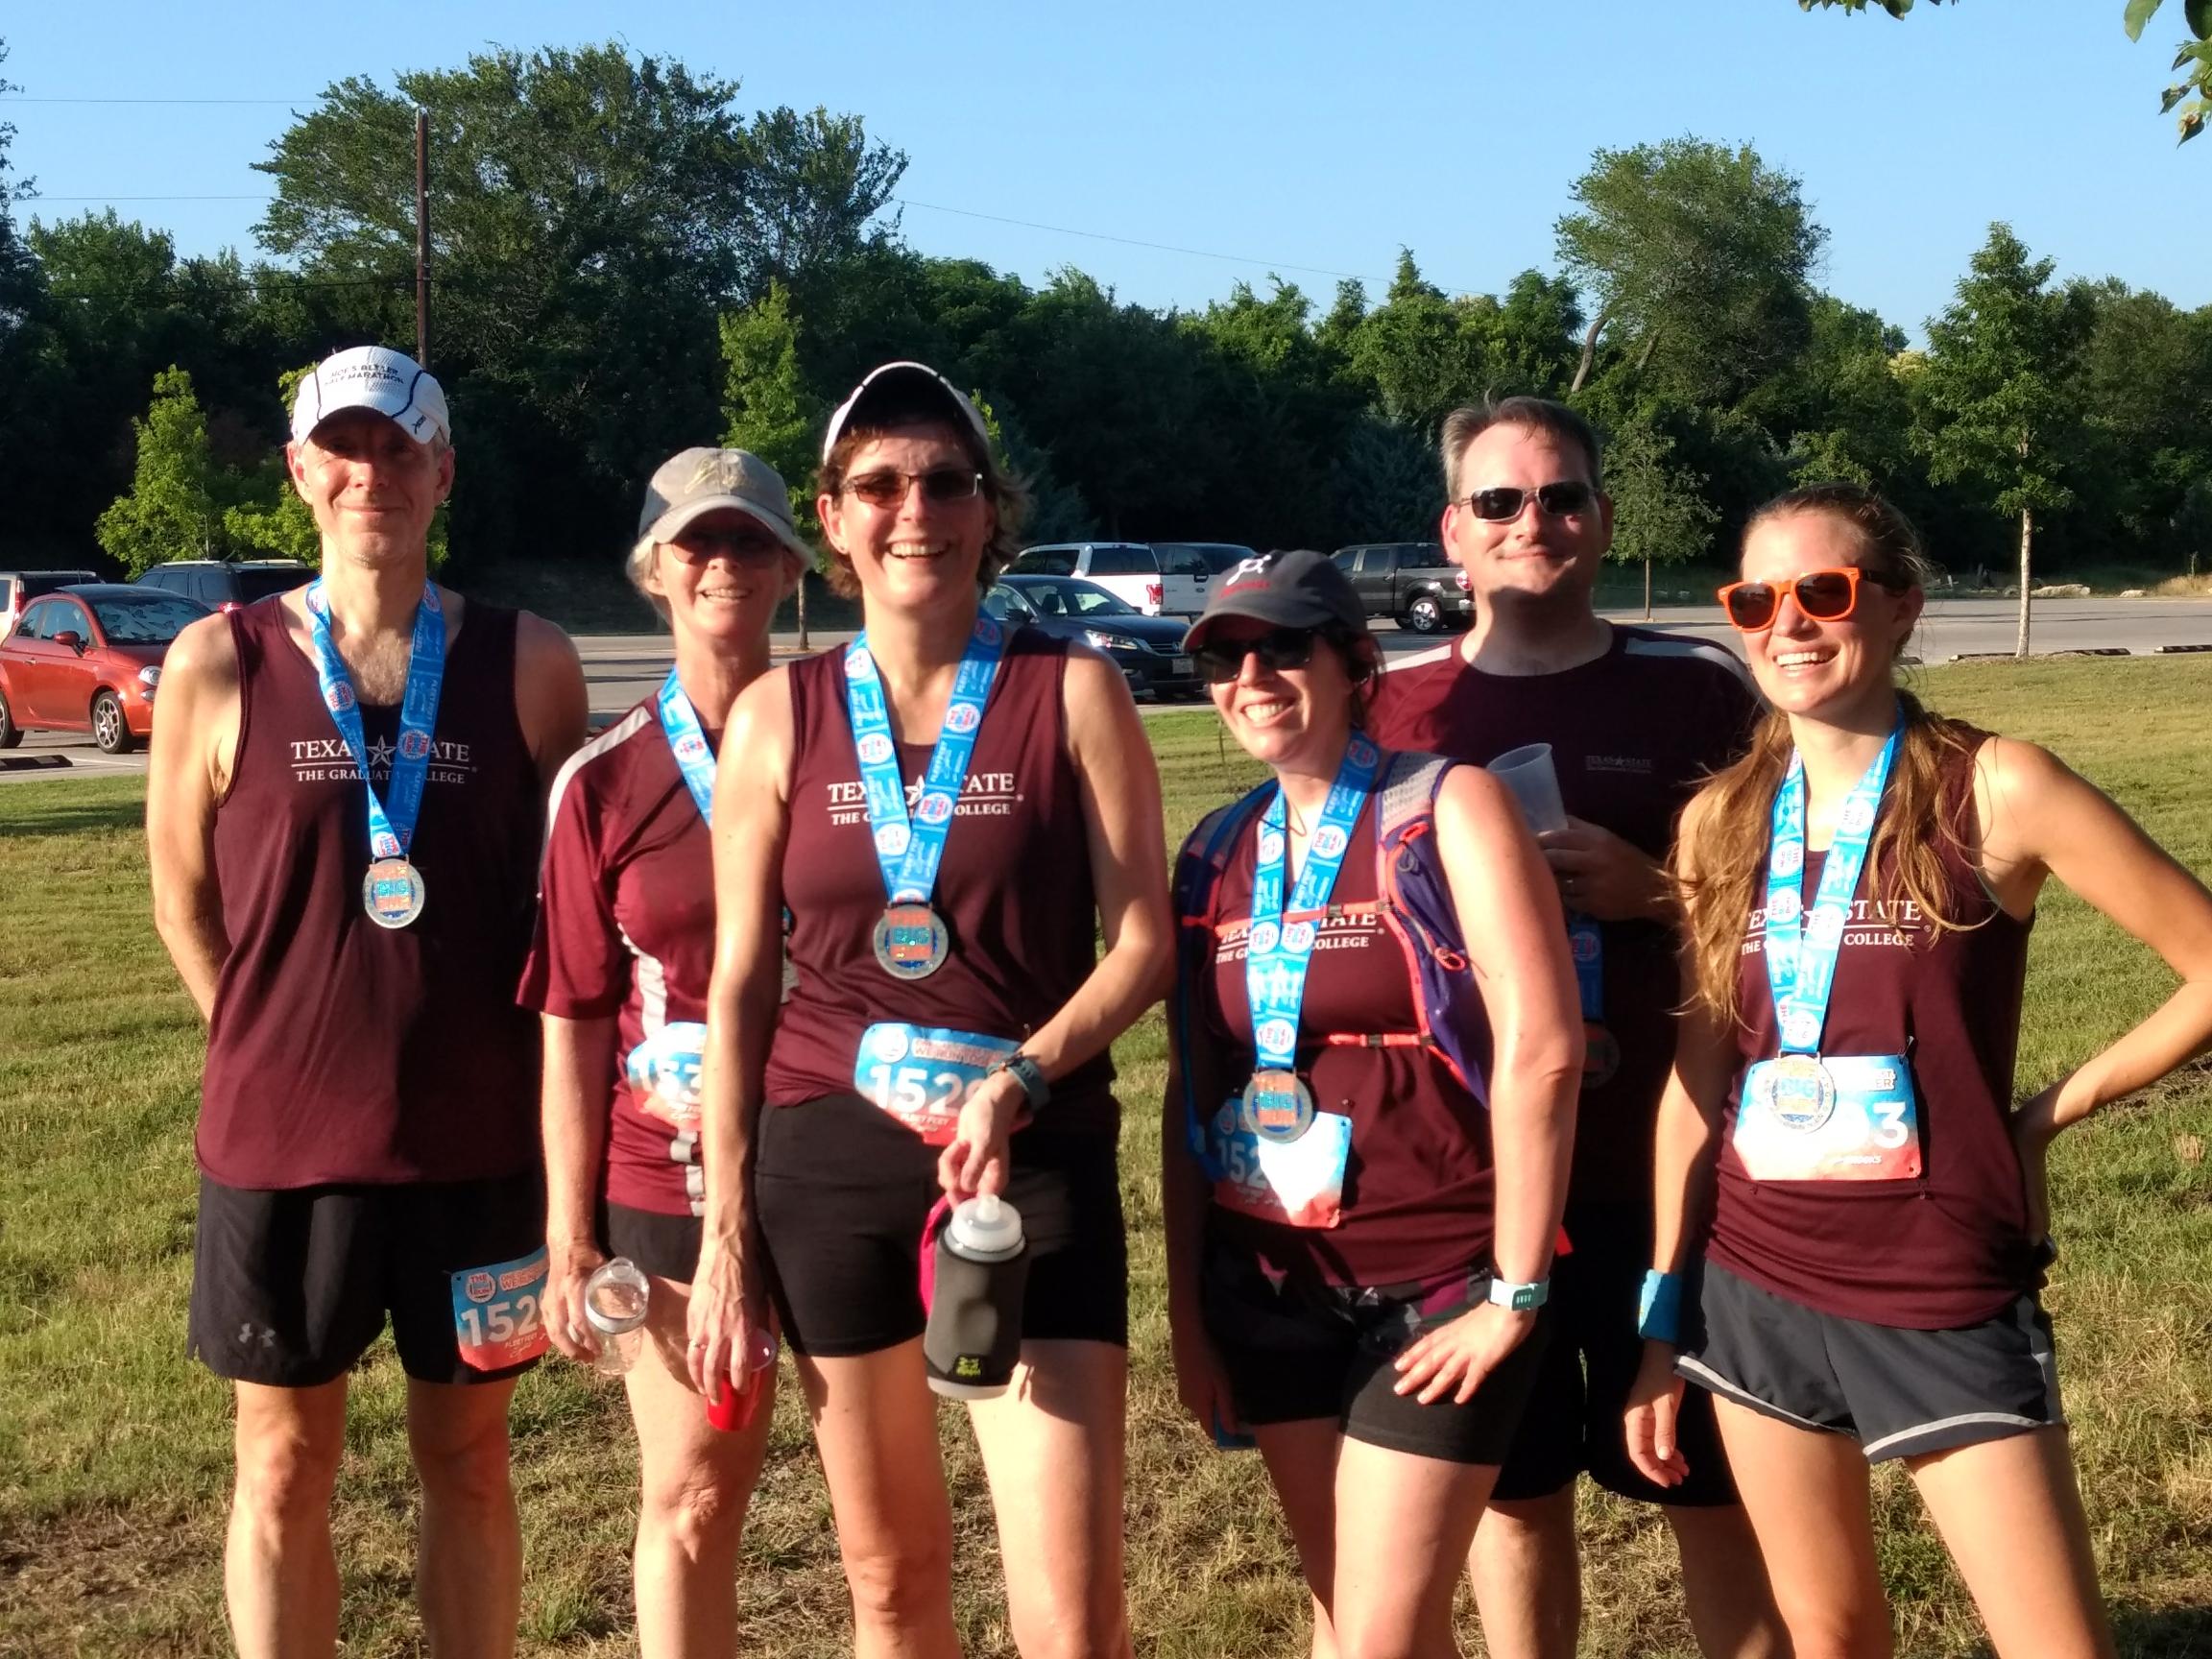 six runners in the maroon "Running With the Grad Deans" shirt take a photo after The Big Run race